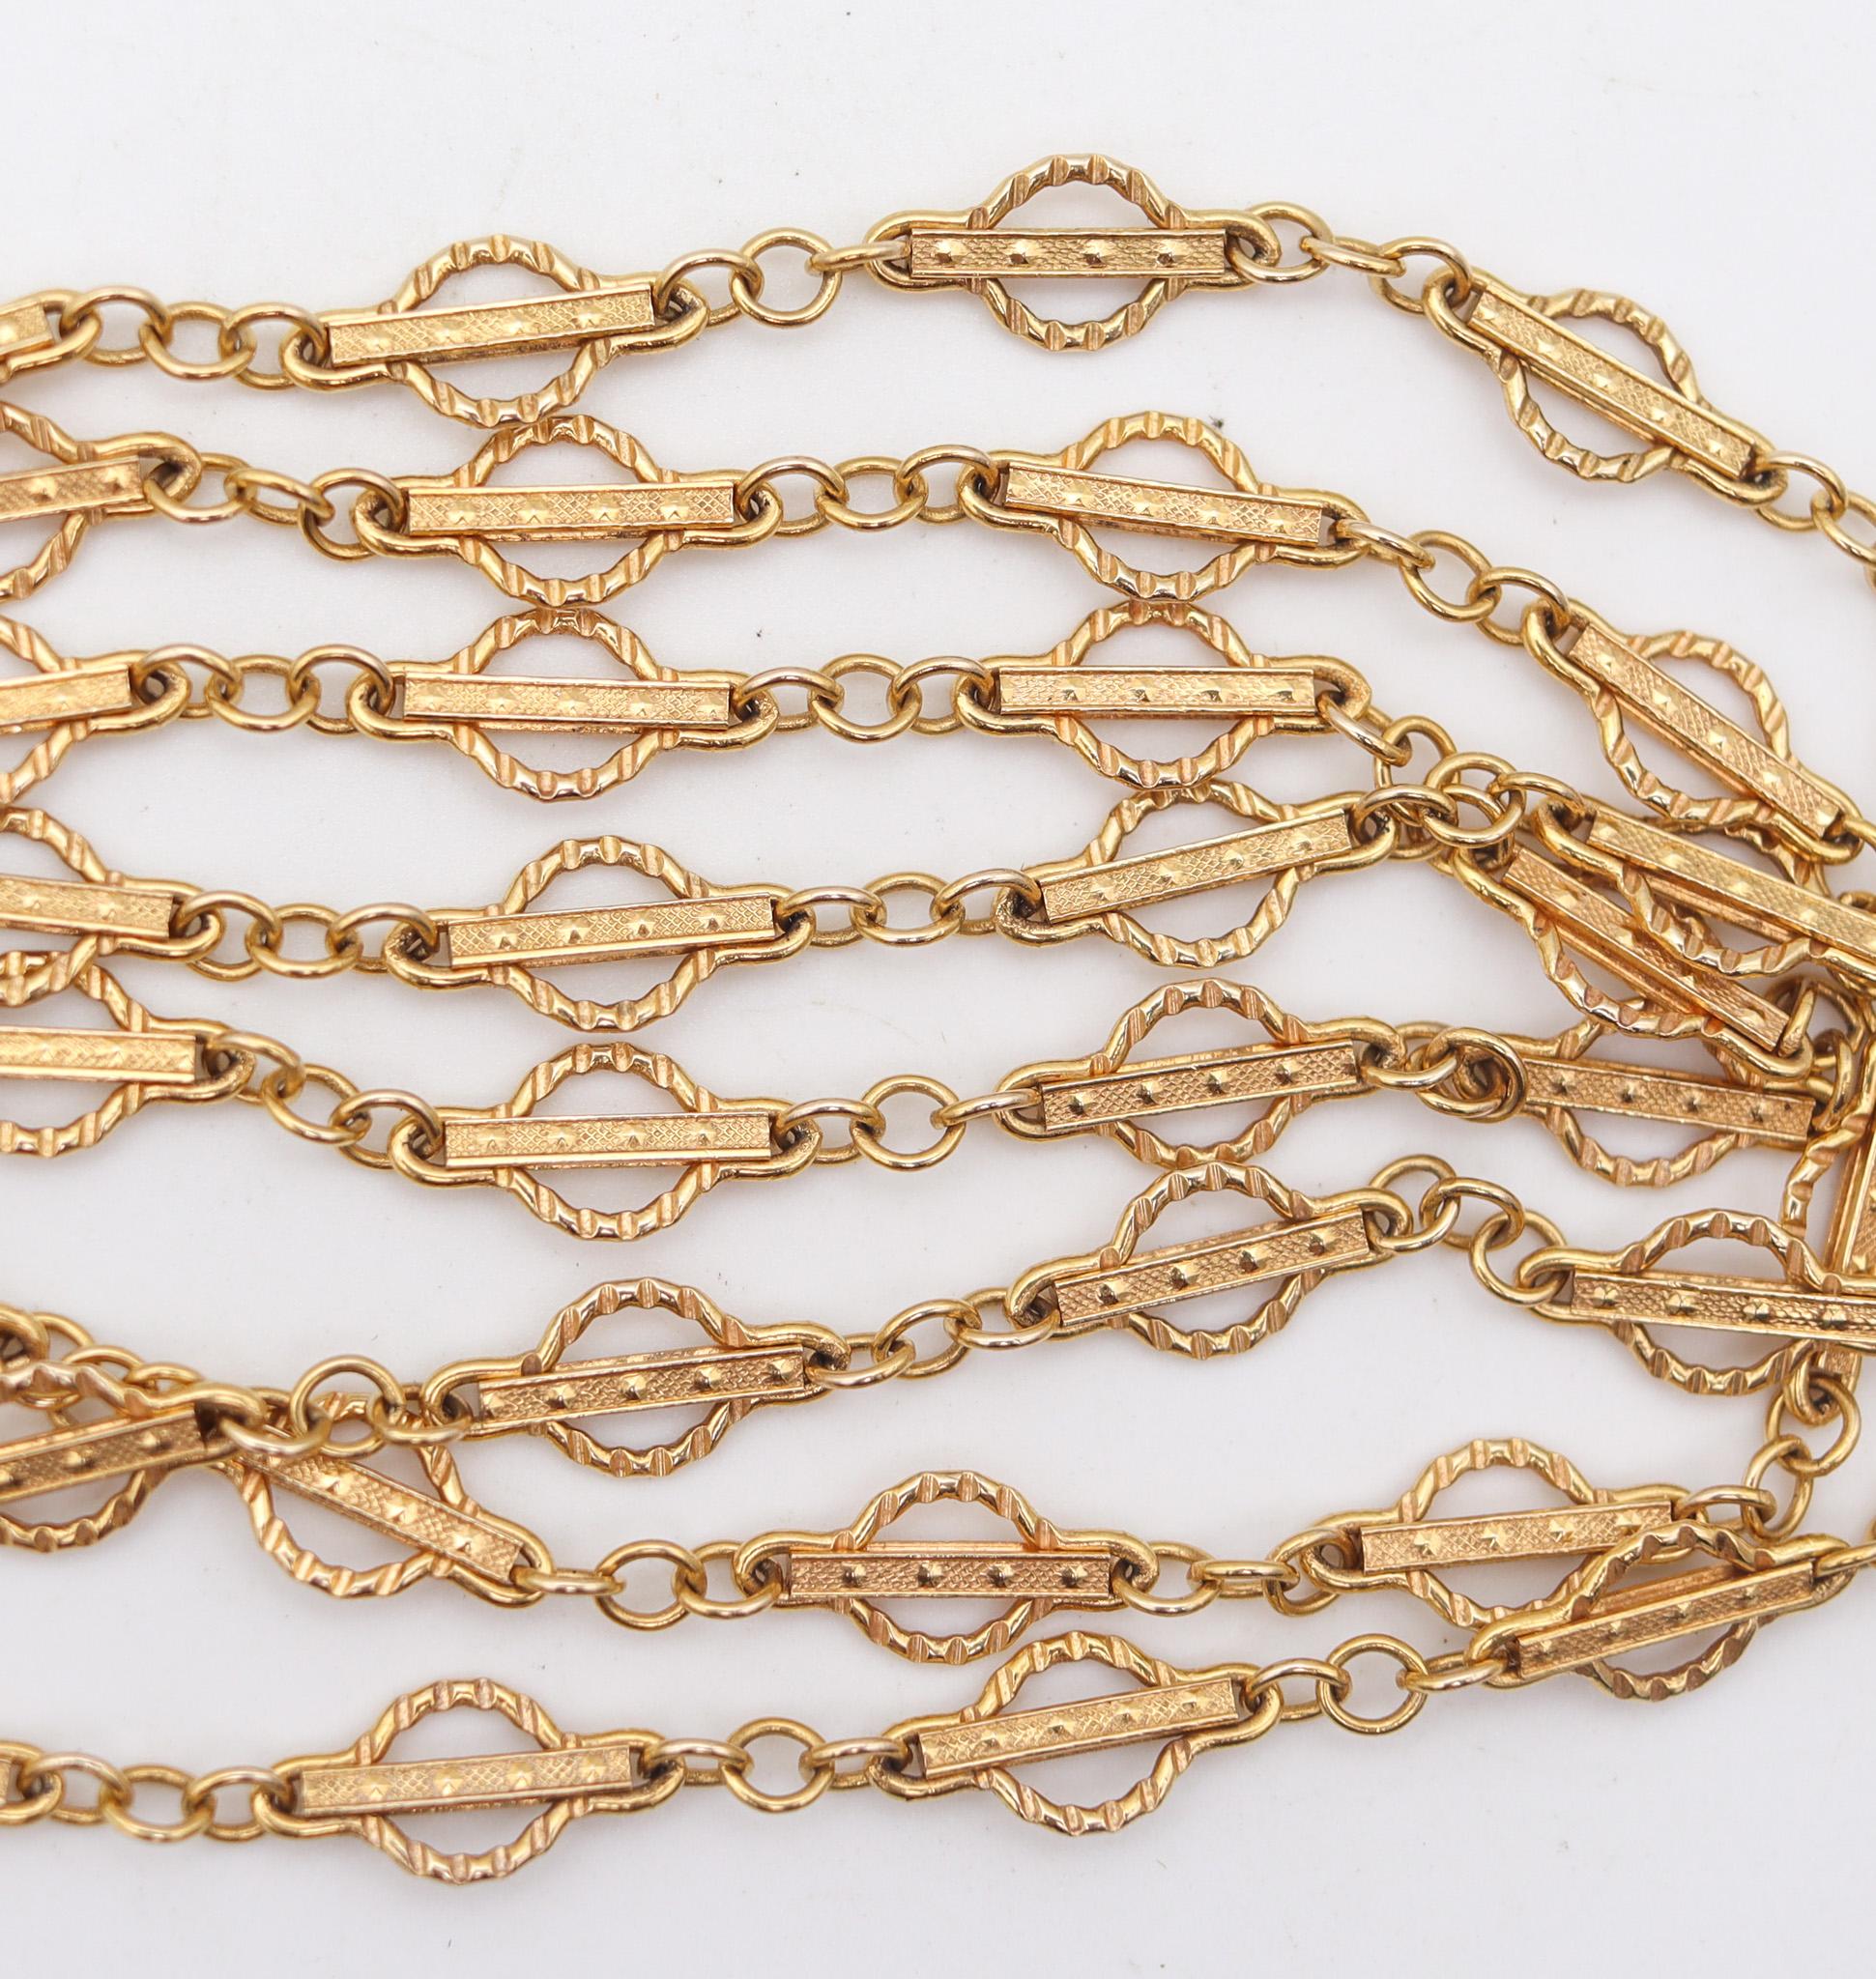 England 1880 Victorian Neo Gothic Geometric Long Chain In 14Kt Yellow Gold 1